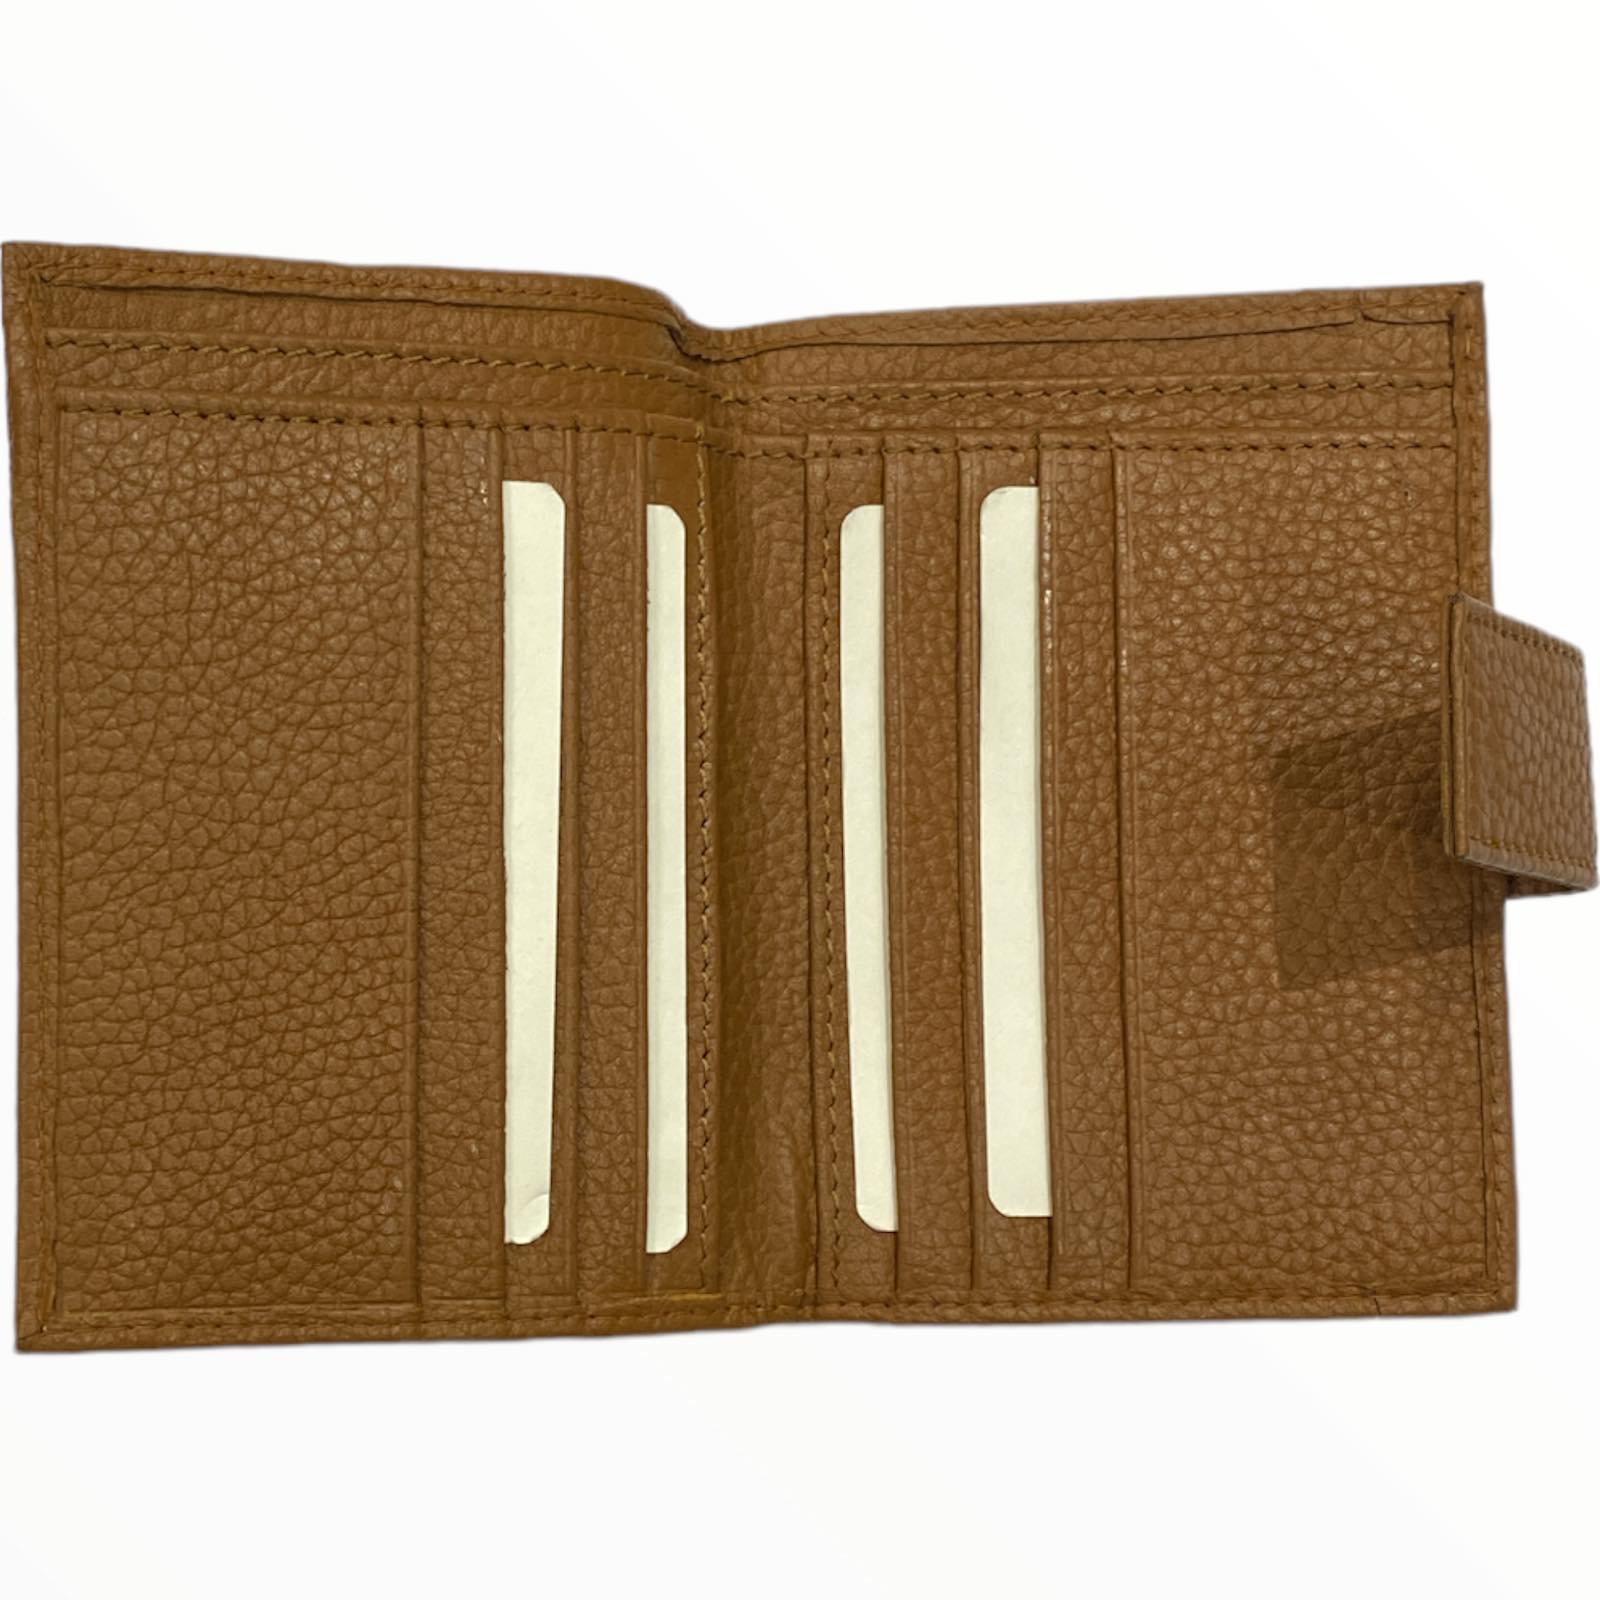 Taba leather zip around small wallet